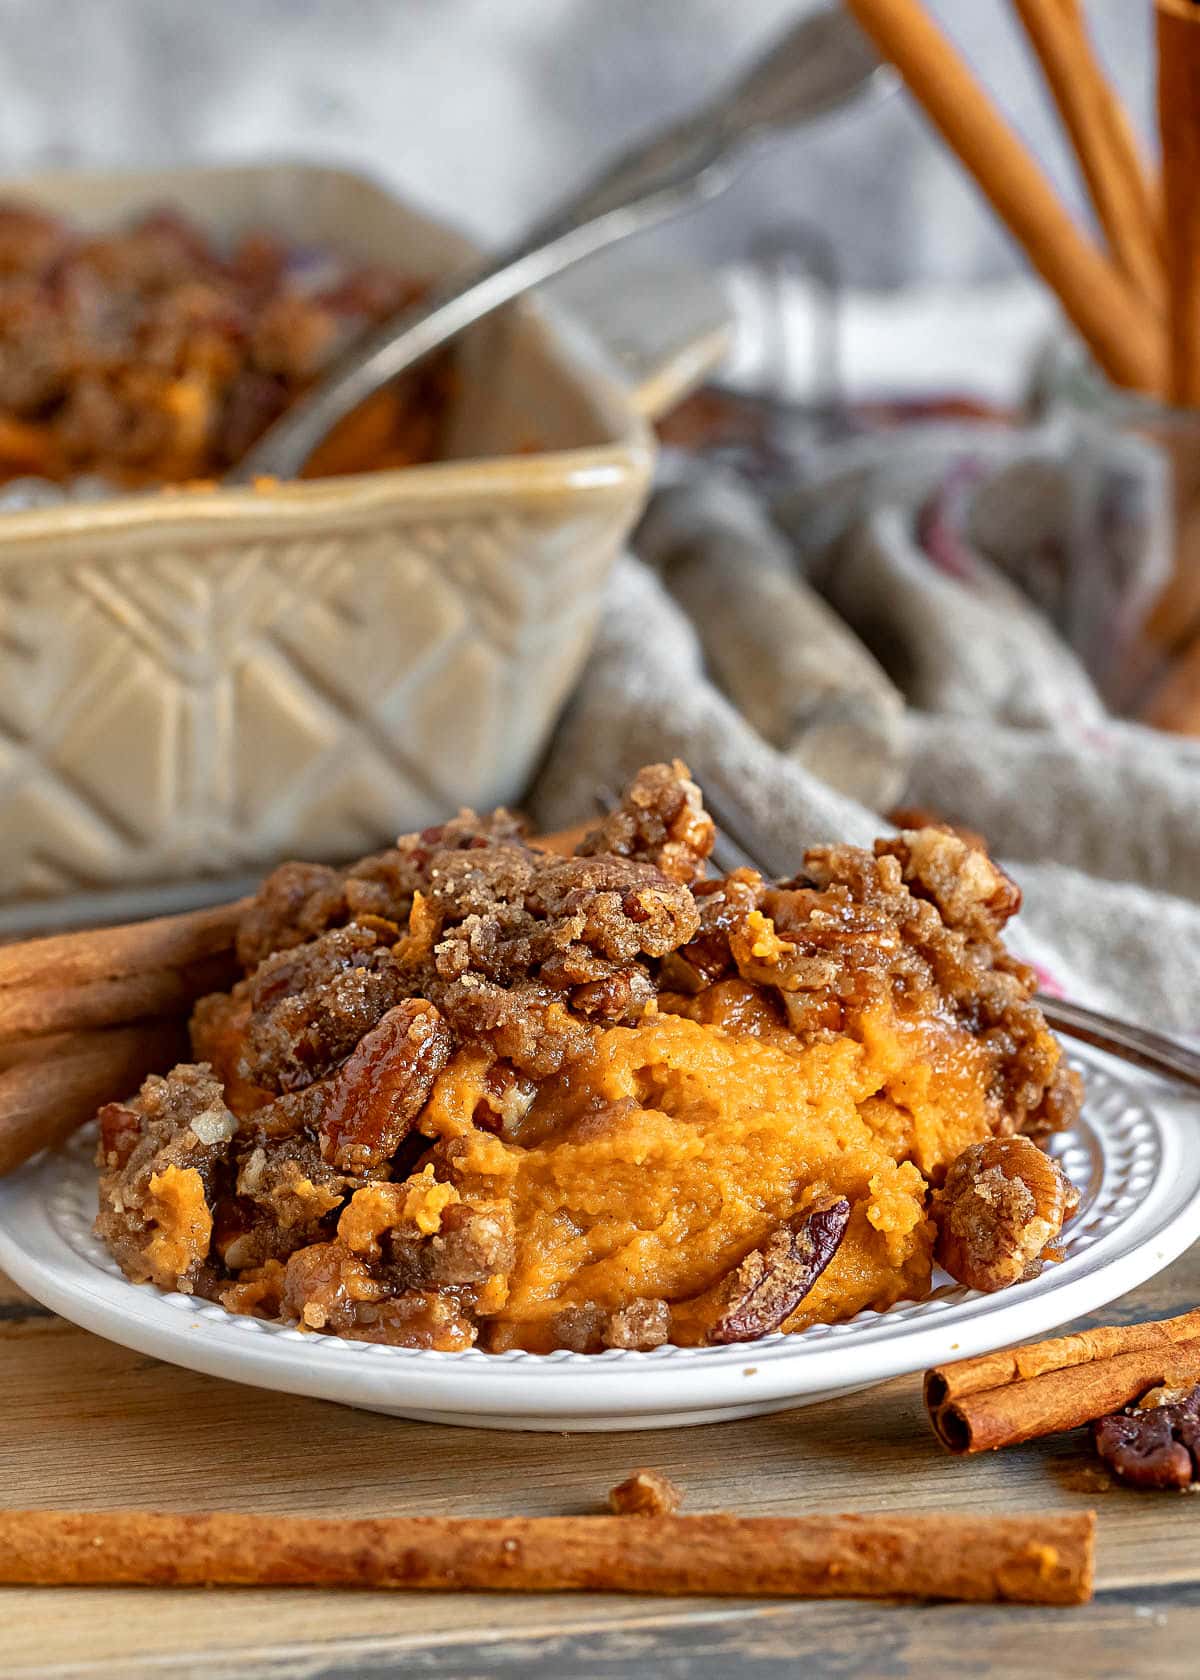 small plate with a serving of sweet potato casserole on it. Baking dish with the rest of the casserole in background. casserole is topped with a pecan streusel.